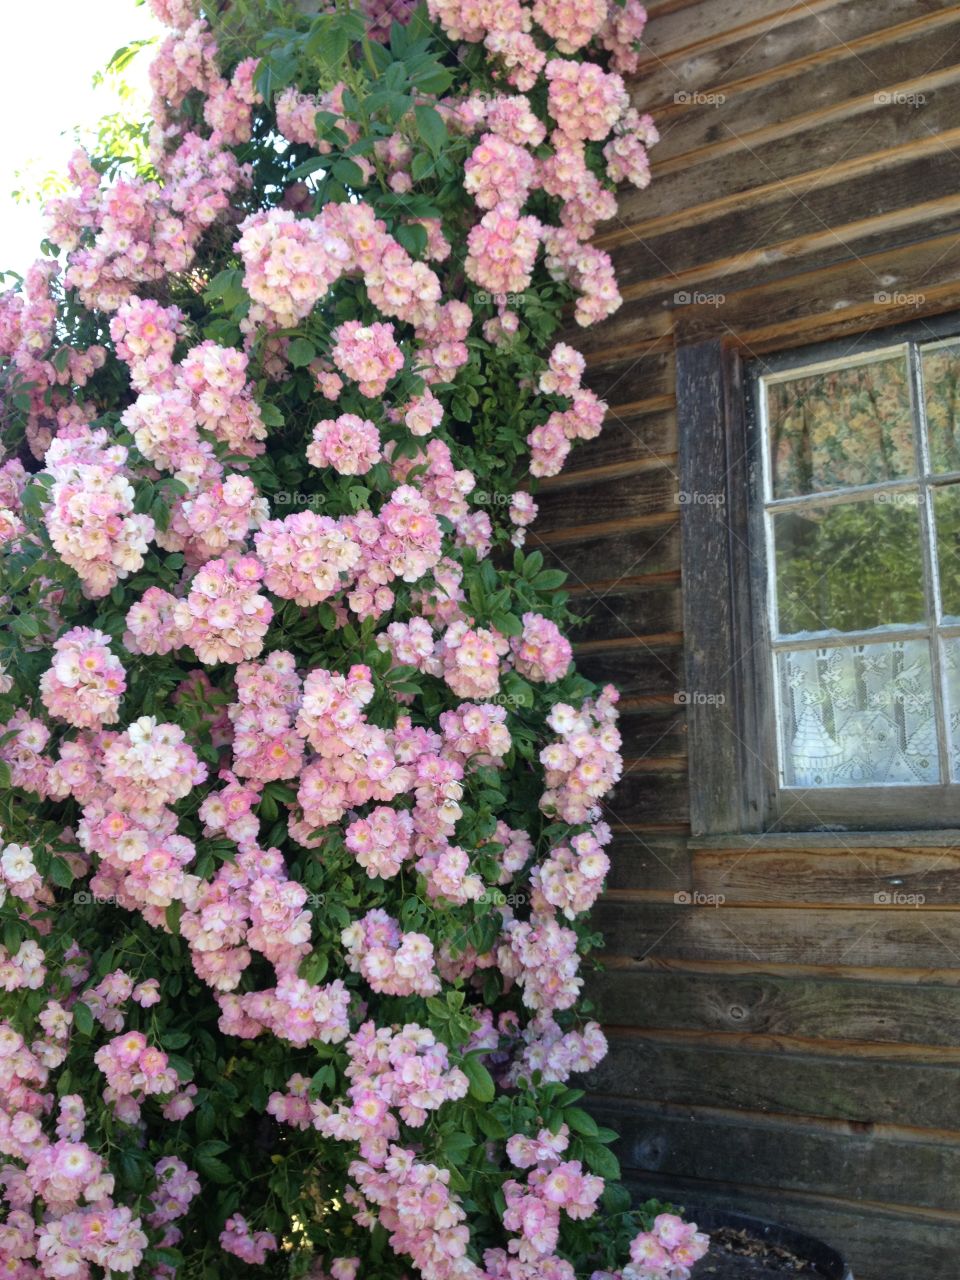 Rustic Barn Overflowing with Flowers